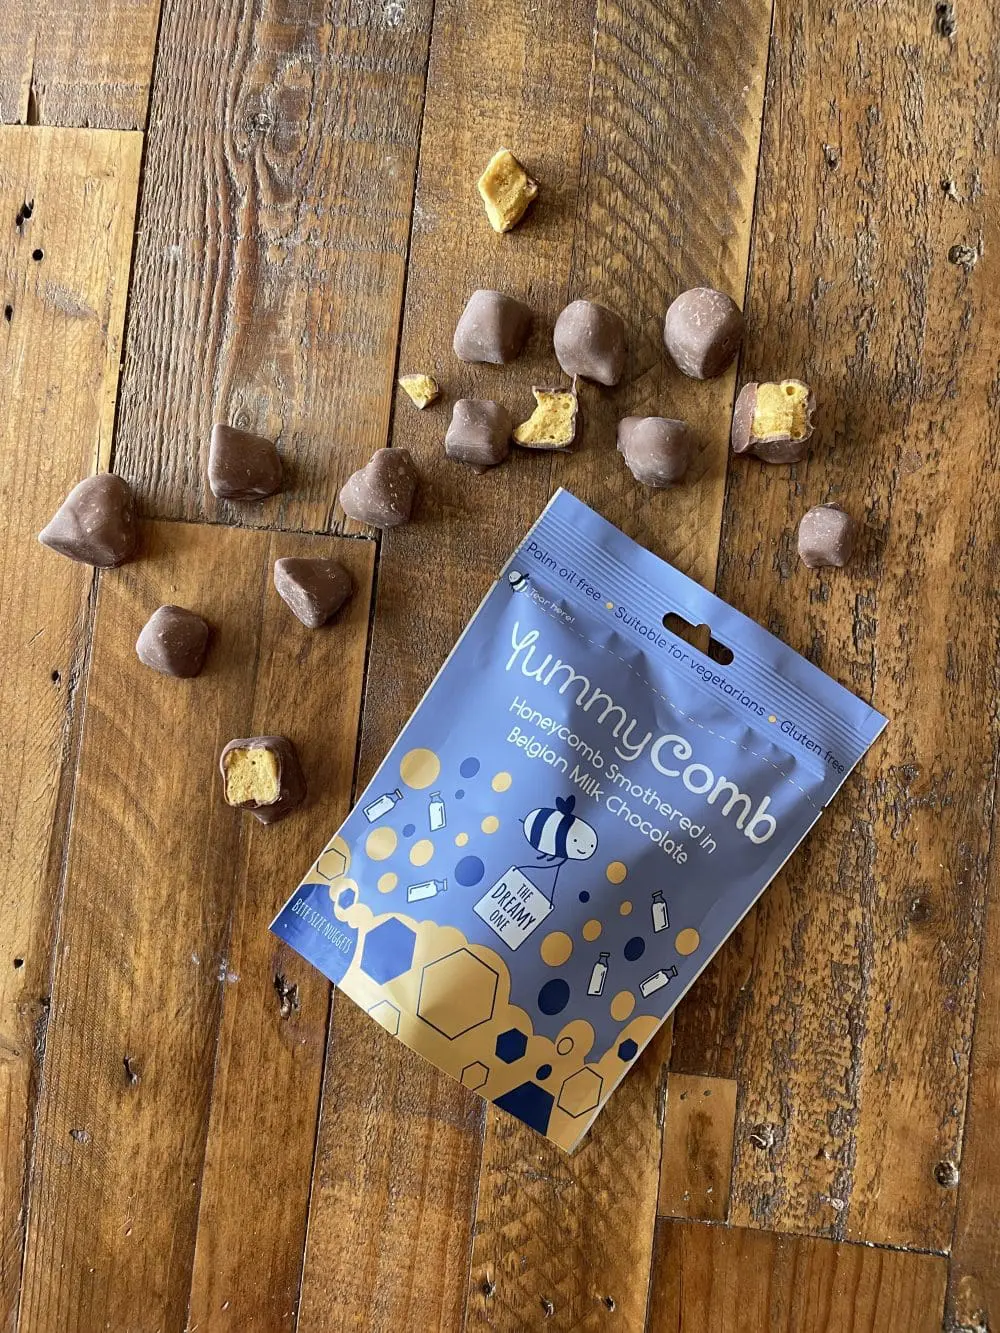 A sharing bag of Yummycombs Premium Belgian Milk chocolate coated handmade honeycomb in a Yorkshire kitchen.